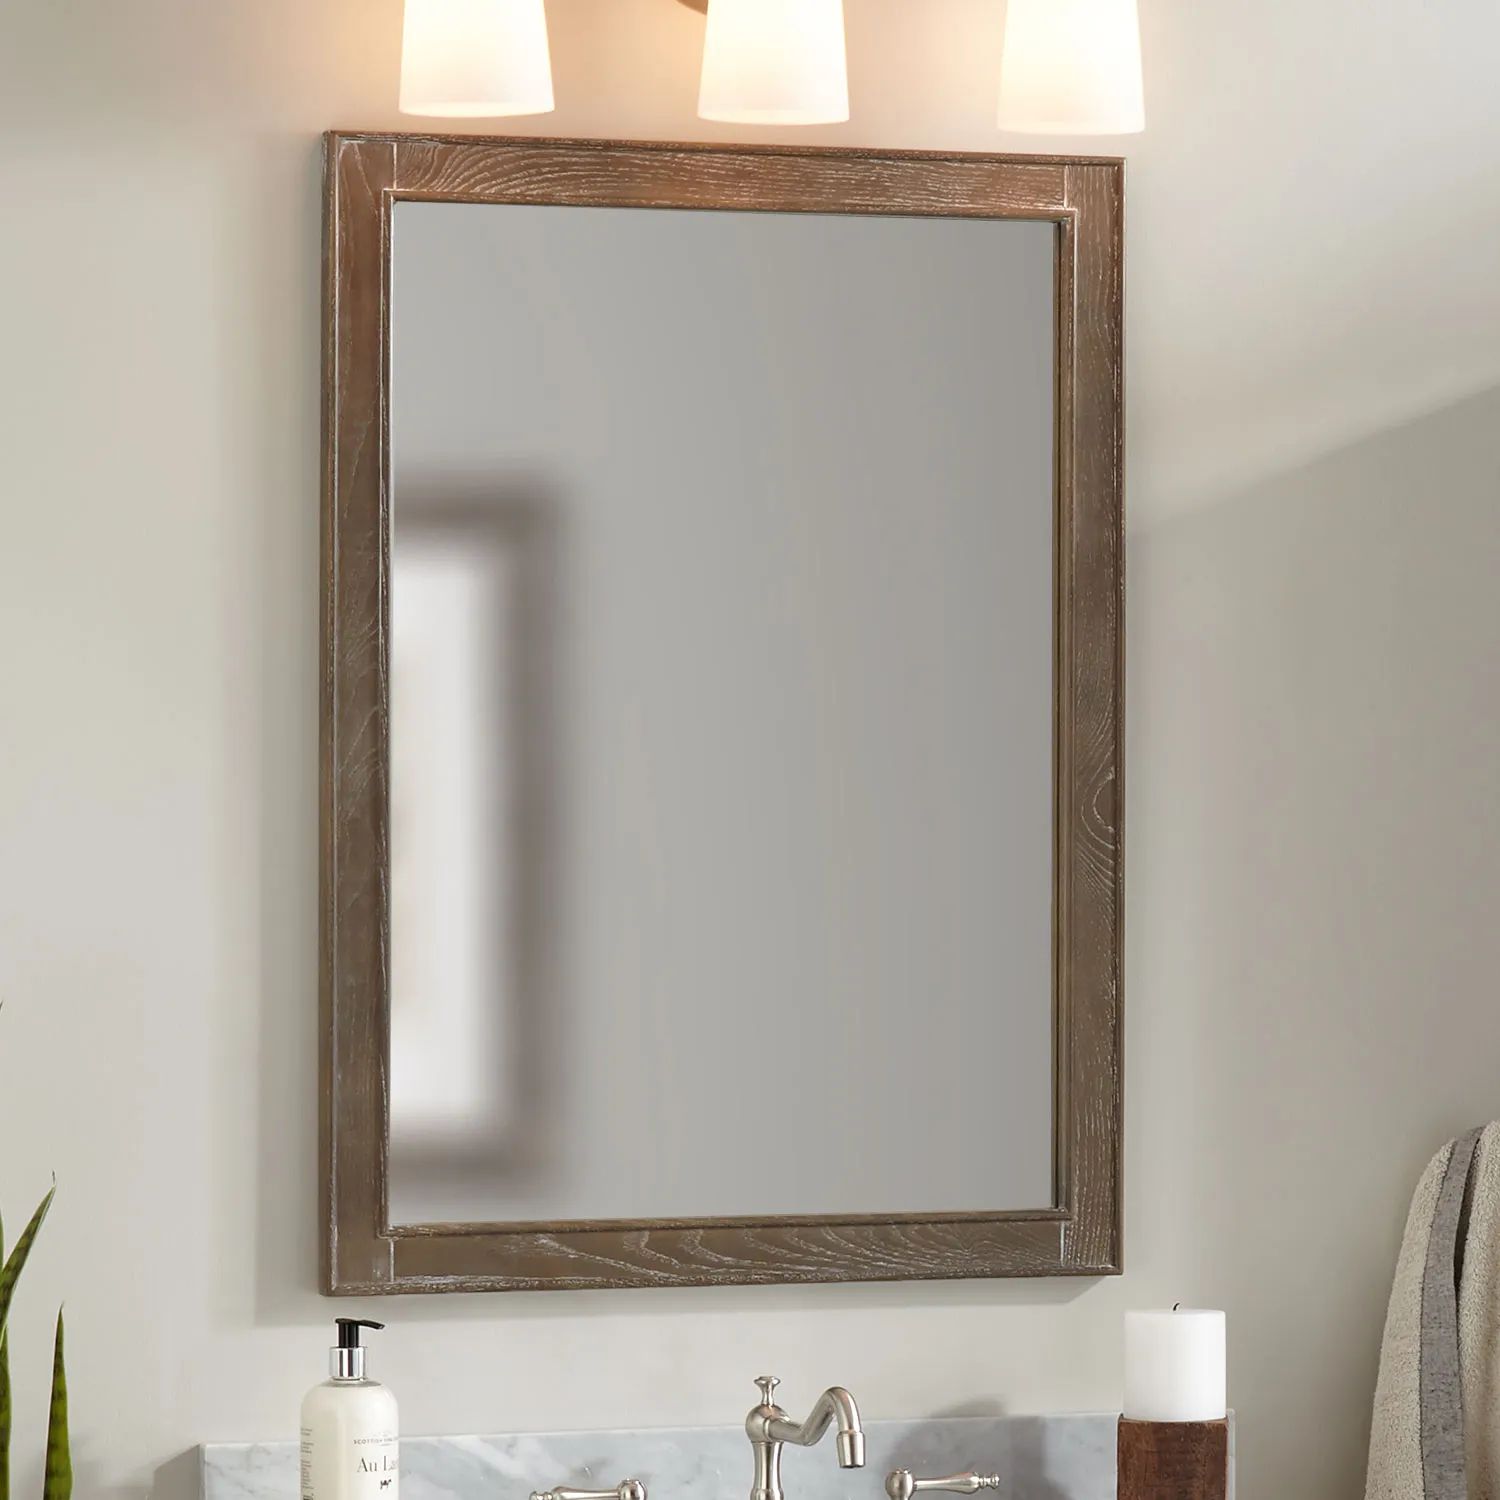 Chelles Vanity Mirror – Gray Wash – Bathroom Mirrors – Bathroom Intended For Gray Washed Wood Wall Mirrors (View 3 of 15)